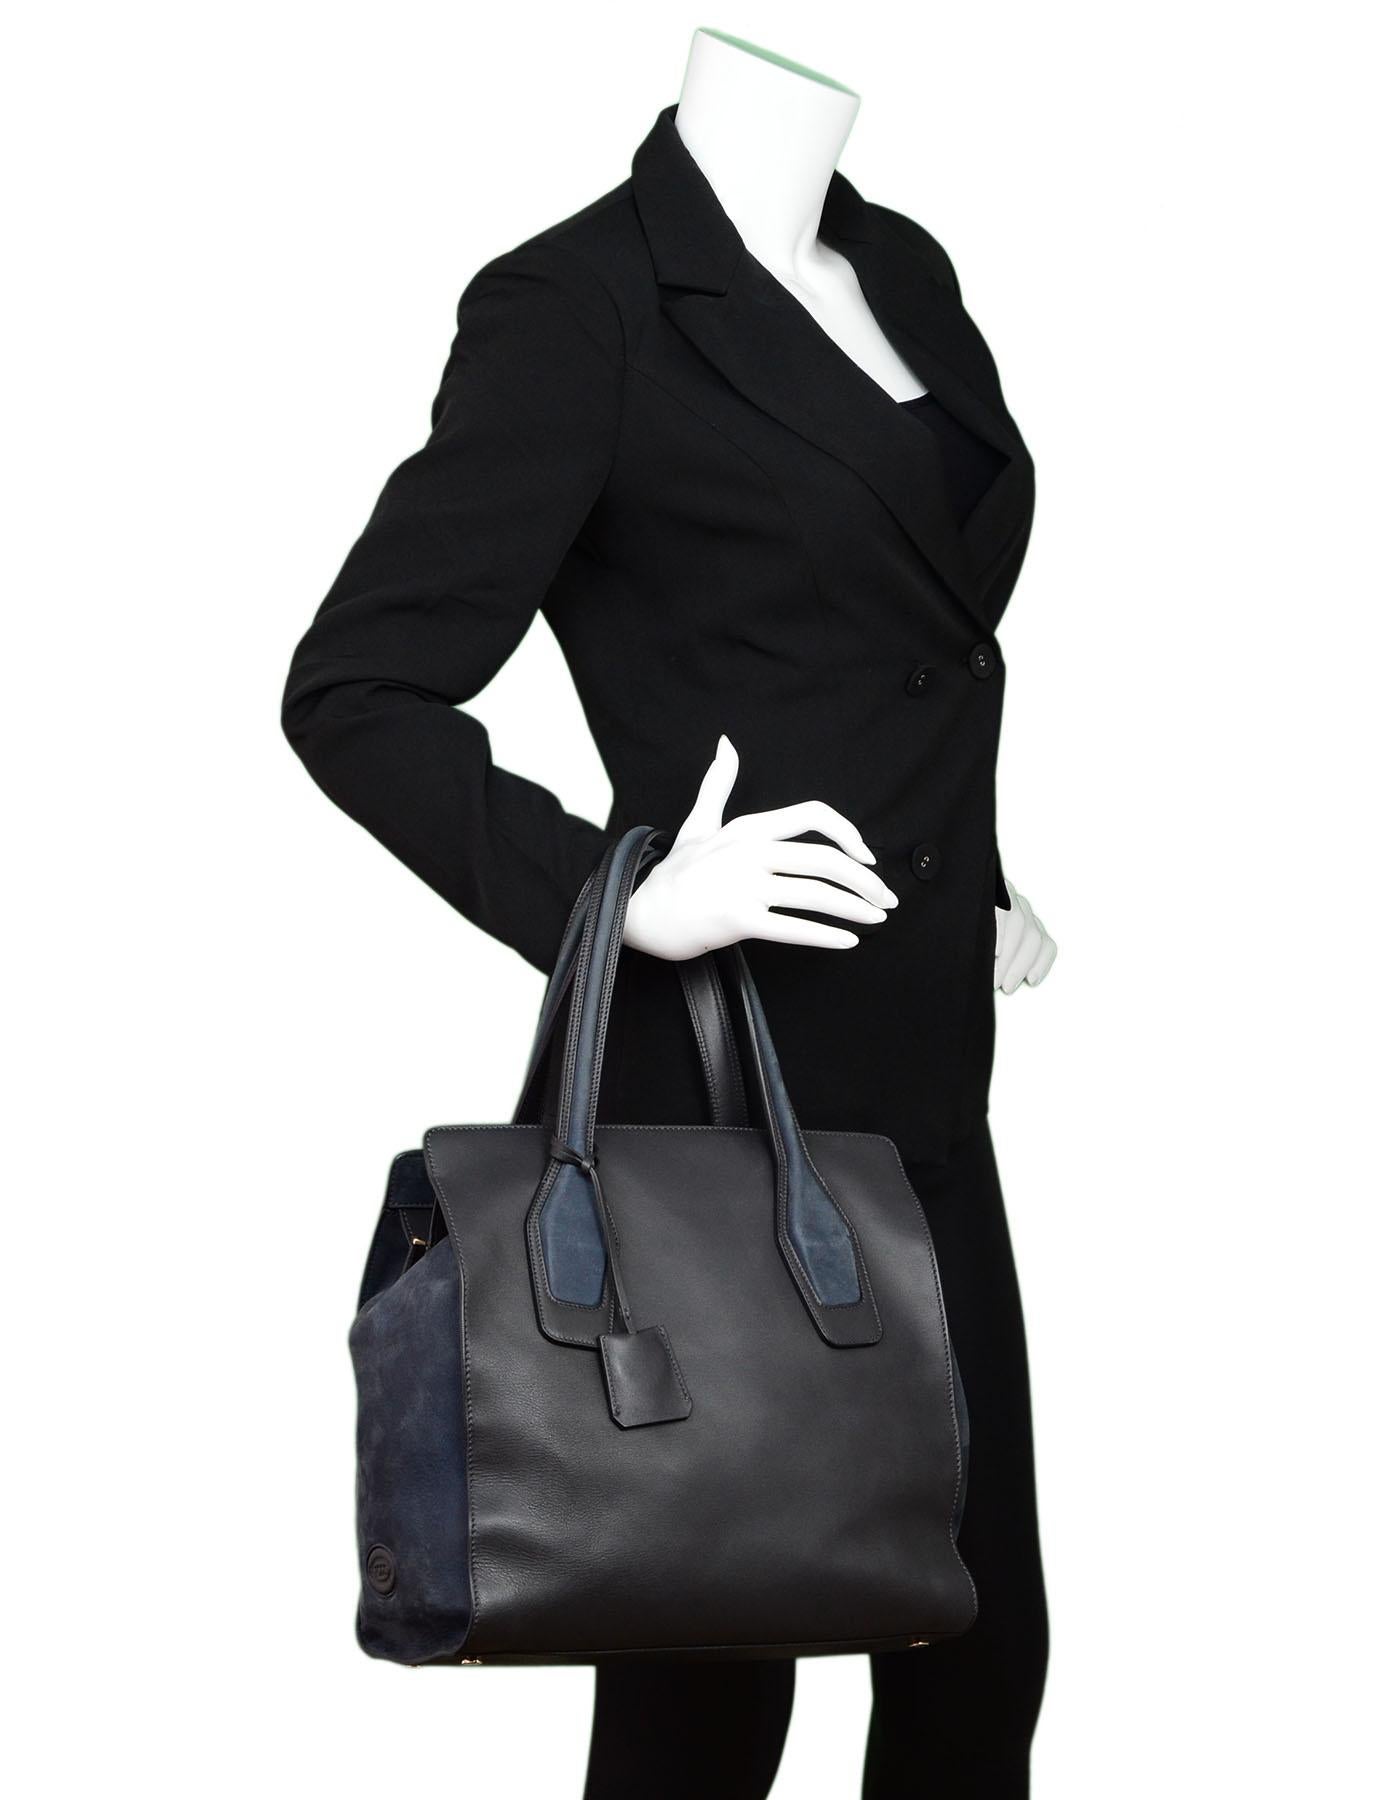 Tod's Black Leather & Navy Suede Tote

Made In: Italy
Color: Black, navy
Materials: Leather, suede
Lining: Black leather
Closure/Opening: Zip top
Exterior Pockets: None
Interior Pockets: One zip wall pocket
Overall Condition: Excellent pre-owned